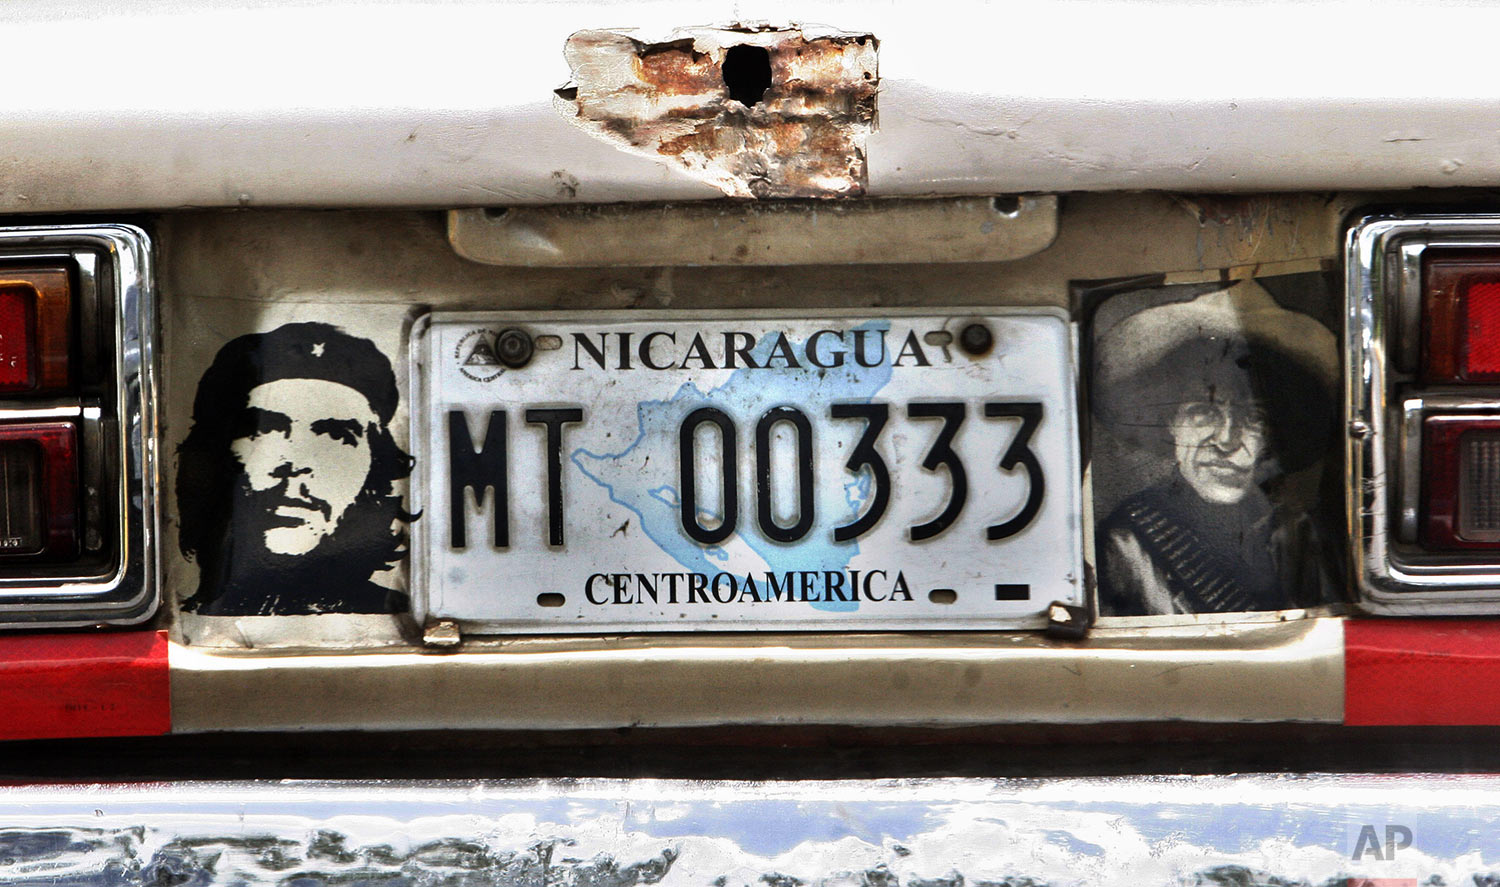  A car decorated with images of Argentinian revolutionary leader Ernesto "Che" Guevara, left, and Nicaragua's national hero Augusto C. Sandino, right, is seen in Managua, Tuesday, June 26, 2007. (AP Photo/Esteban Felix) 